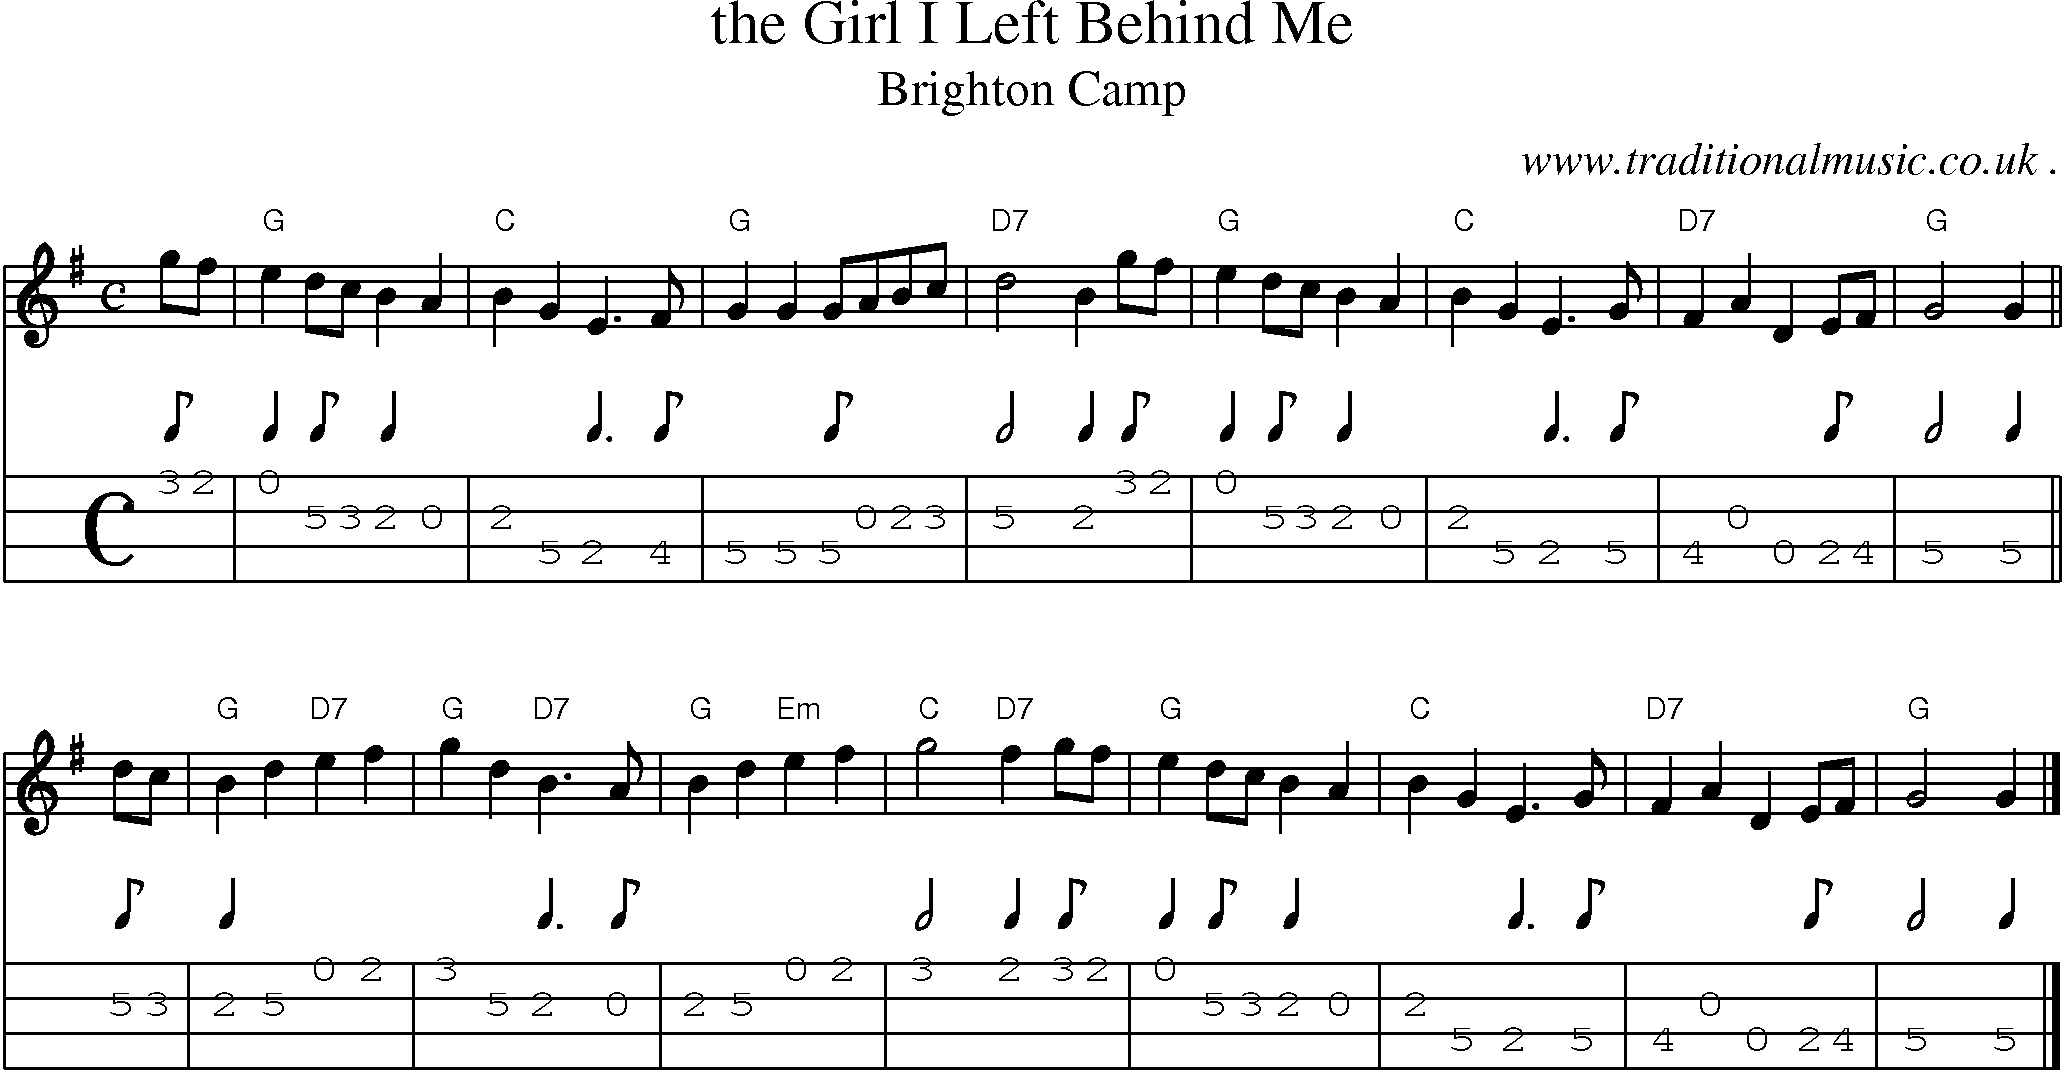 Sheet-music  score, Chords and Mandolin Tabs for The Girl I Left Behind Me